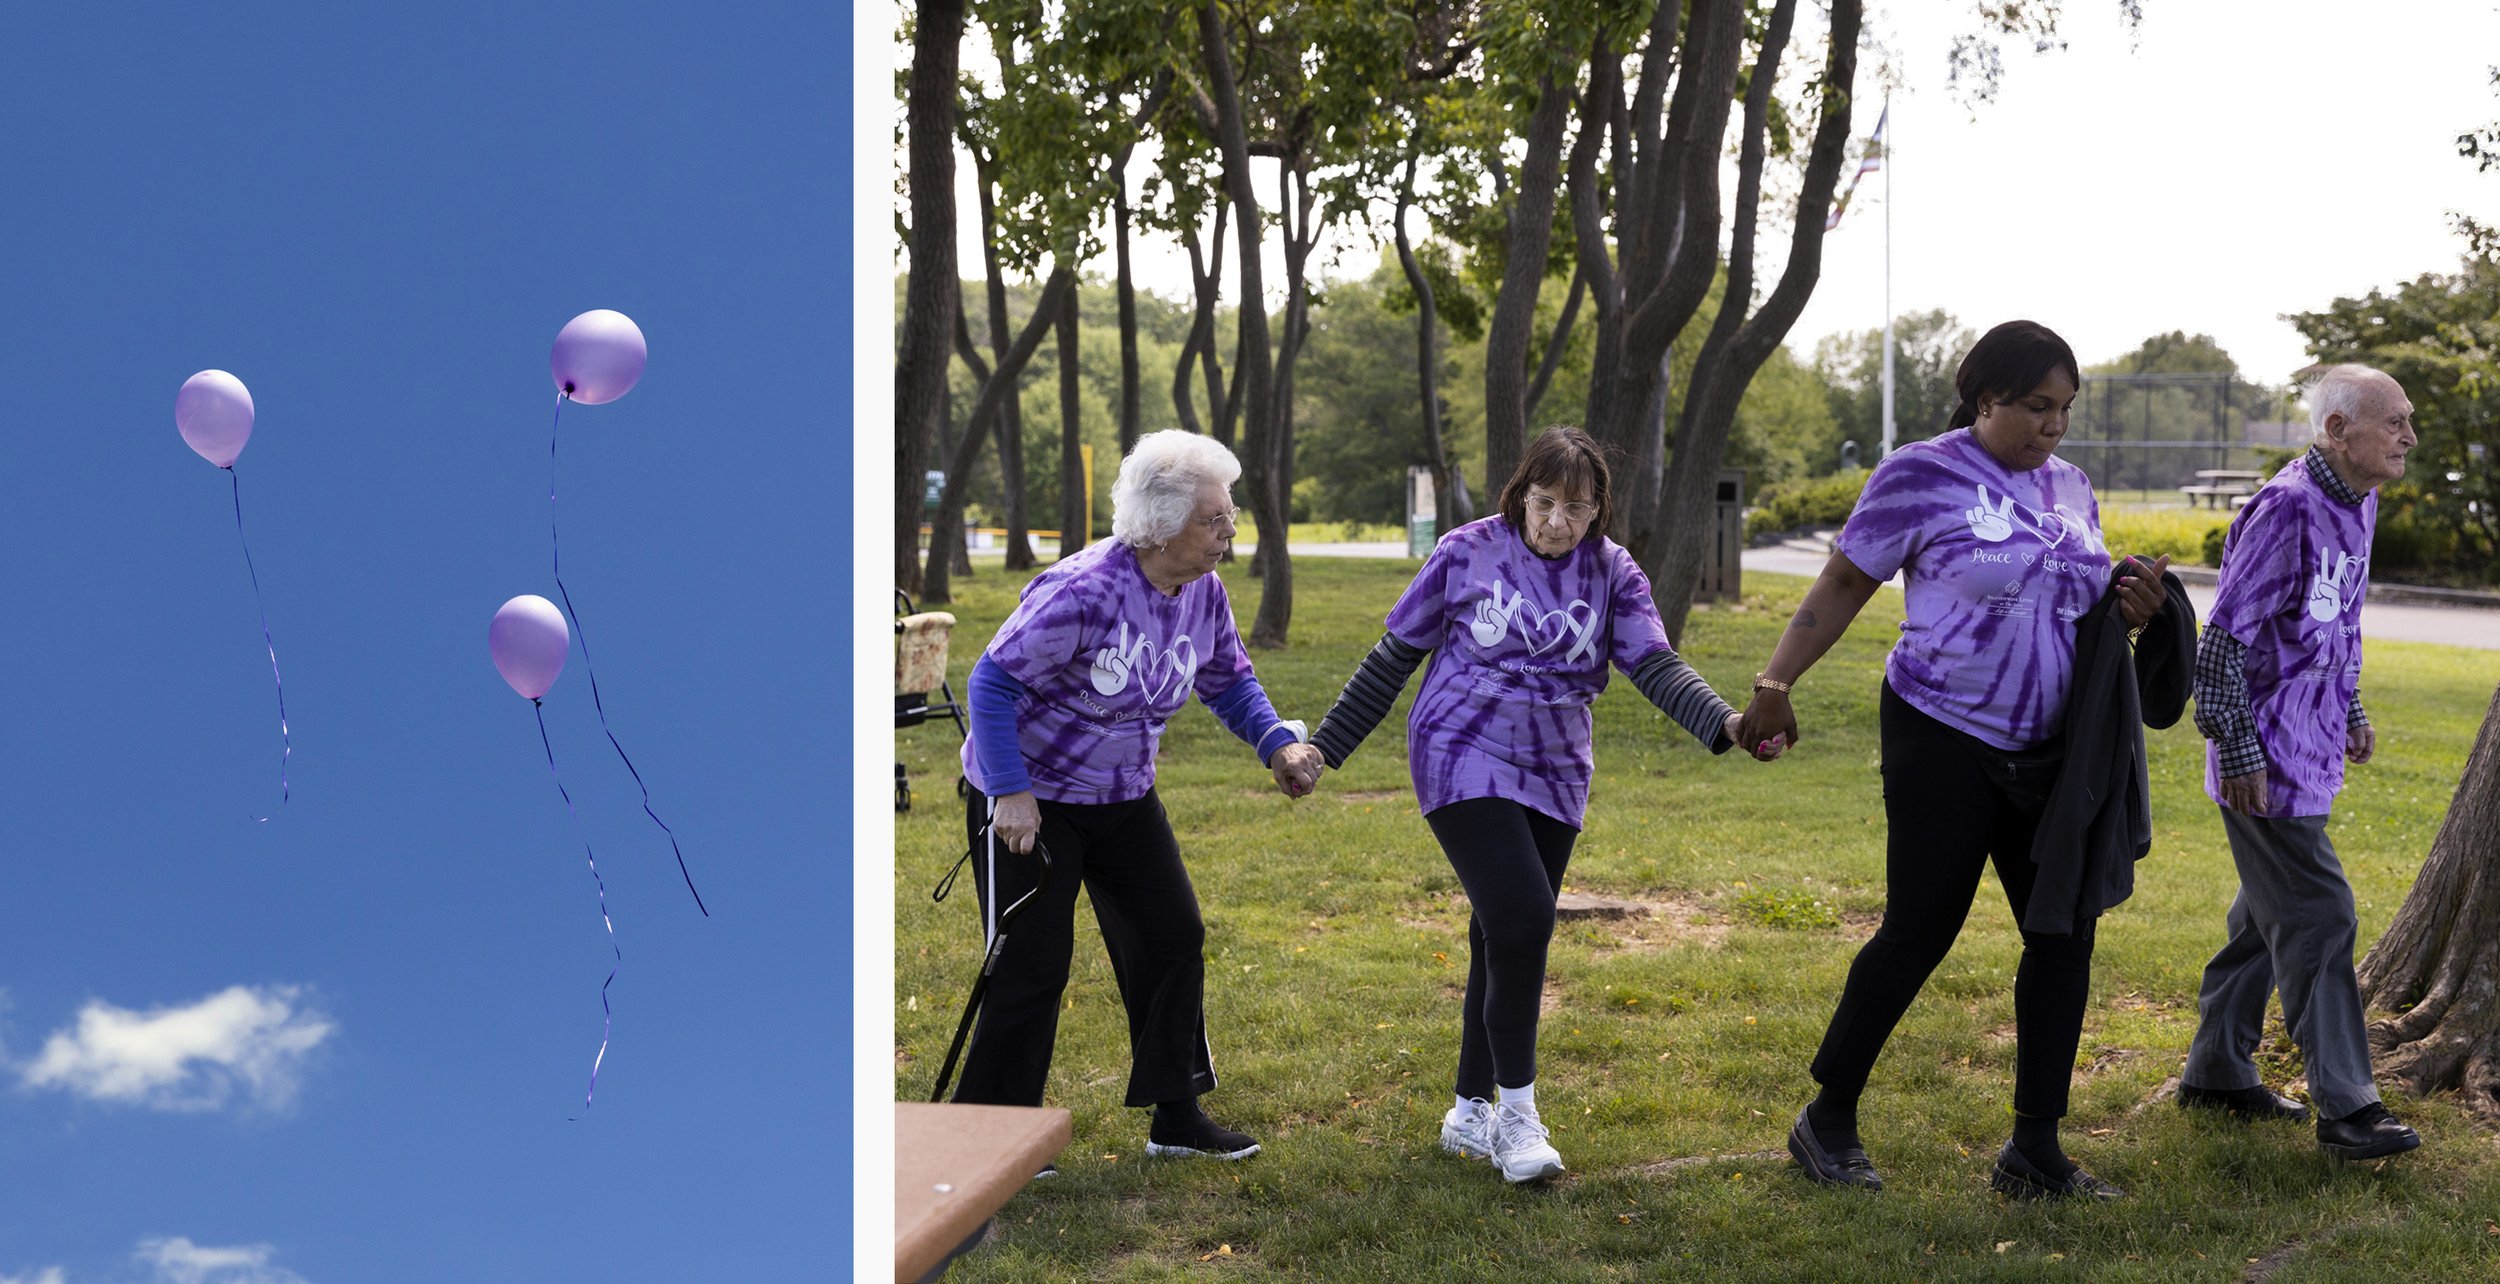  Memory care coordinator Motia Johnson (right) walks with residents at the annual Alzheimer’s walk on June 16, 2021. The residents released balloons to commemorate Ida, who had recently passed.  